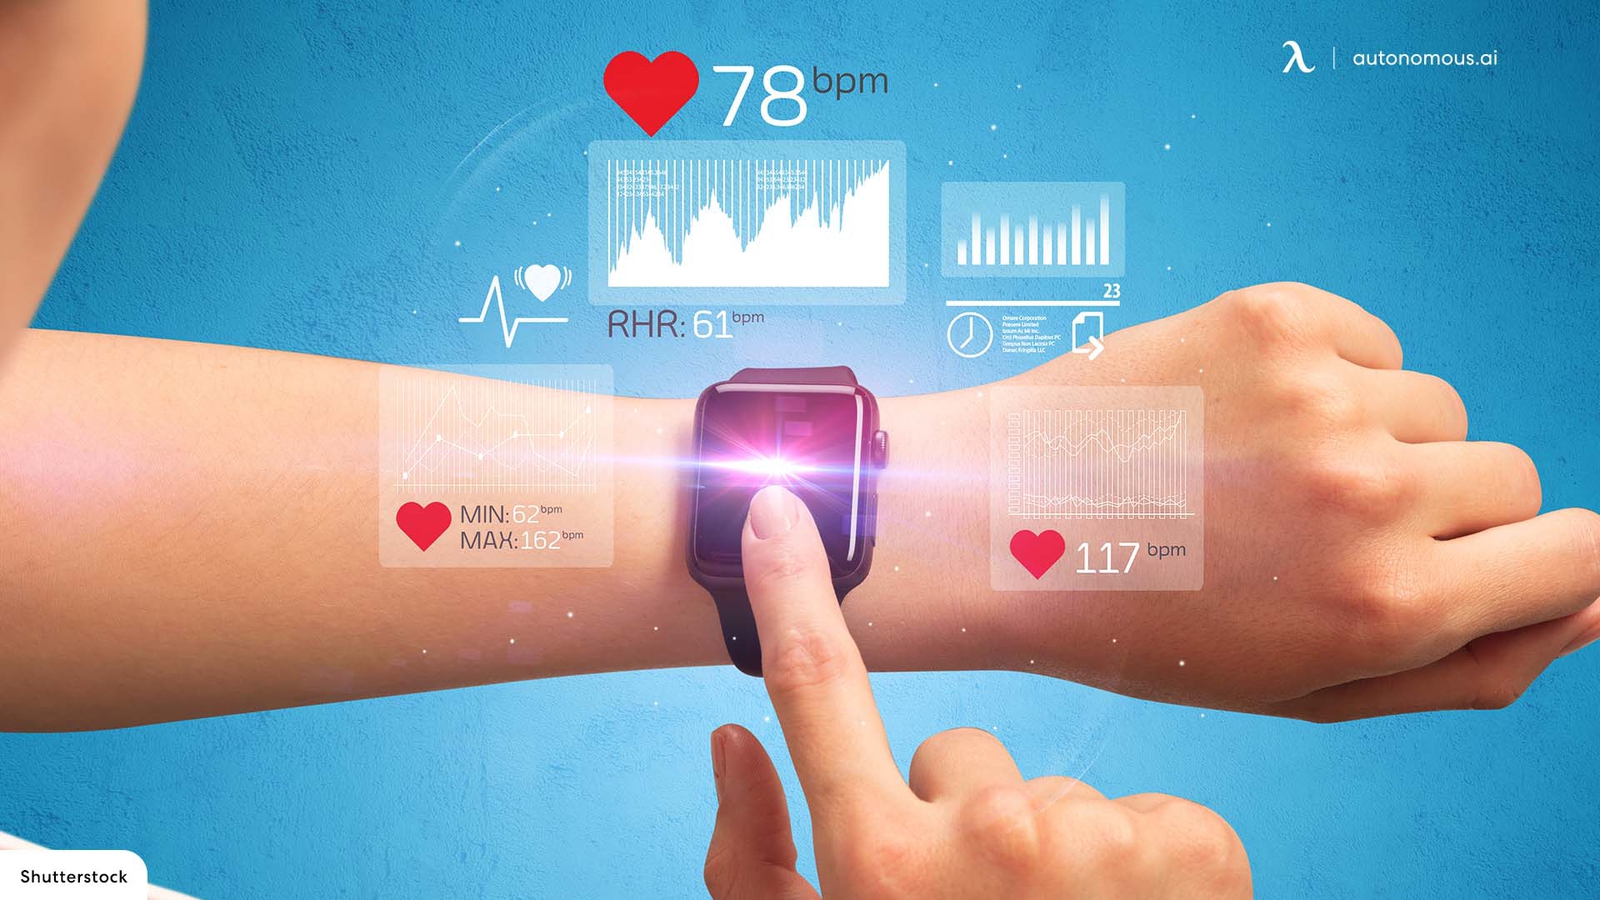 What You Need to Know about Health Tracking?